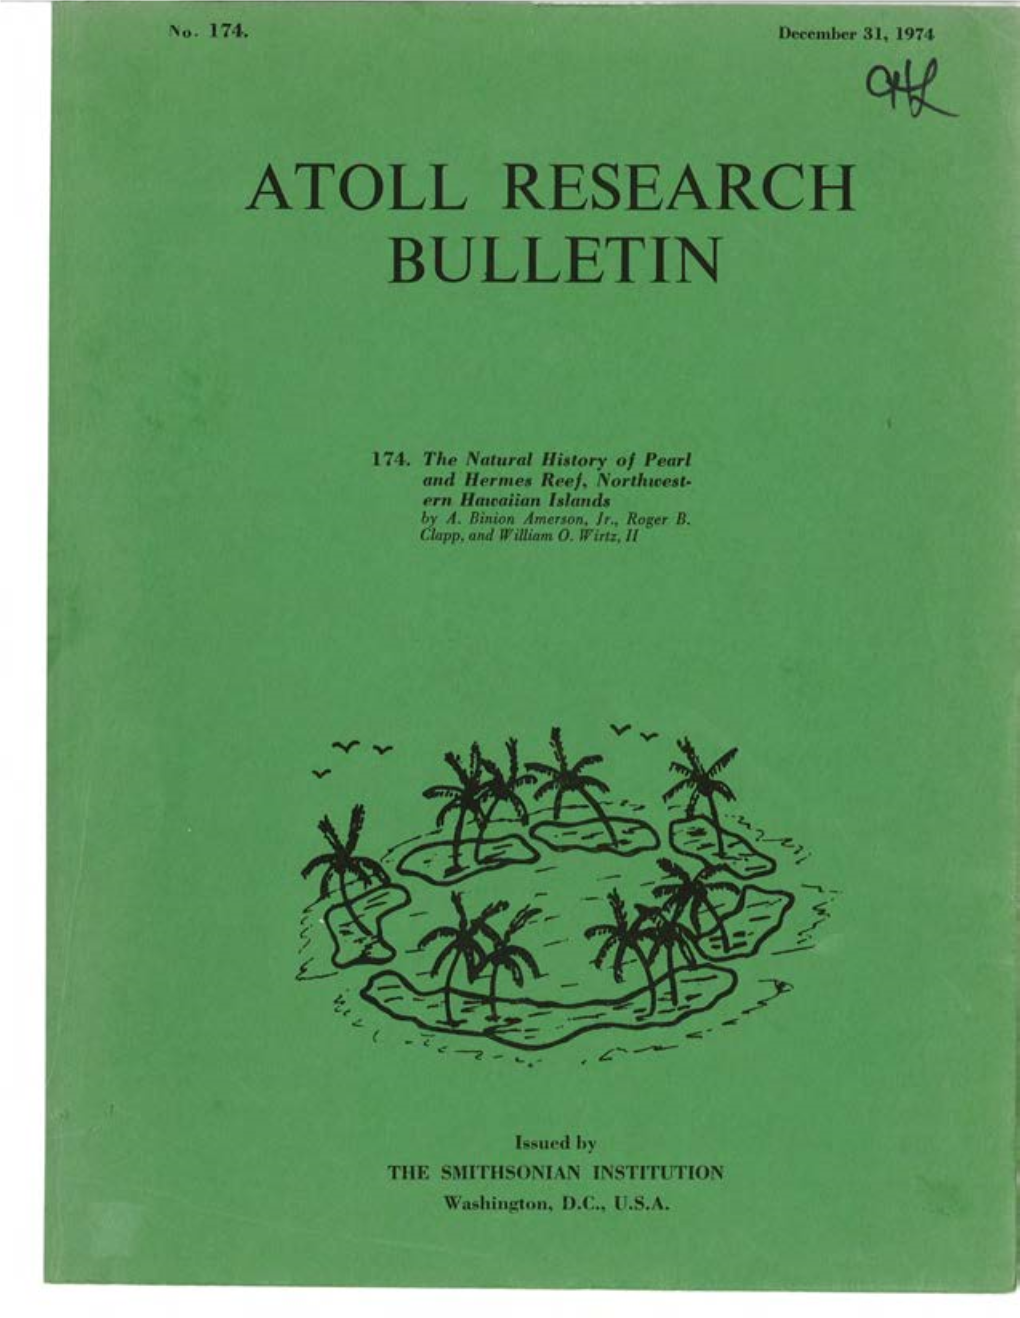 Amerson Et Al. (1974) the Natural History Of